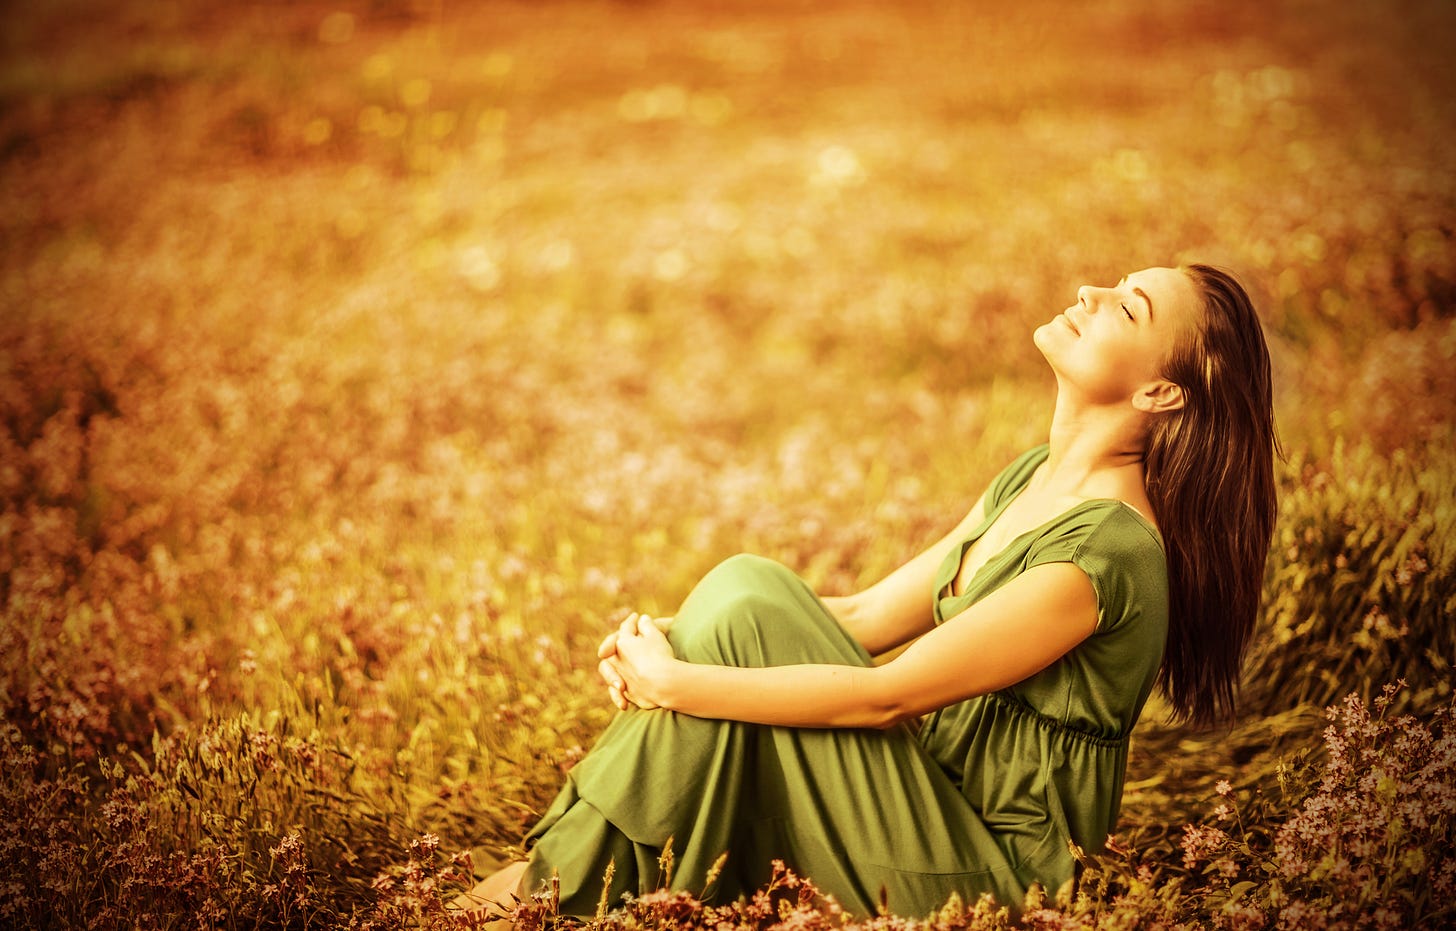 happy girl with long brown hair wearing green dress sitting in golden grassy field with arms around her knees